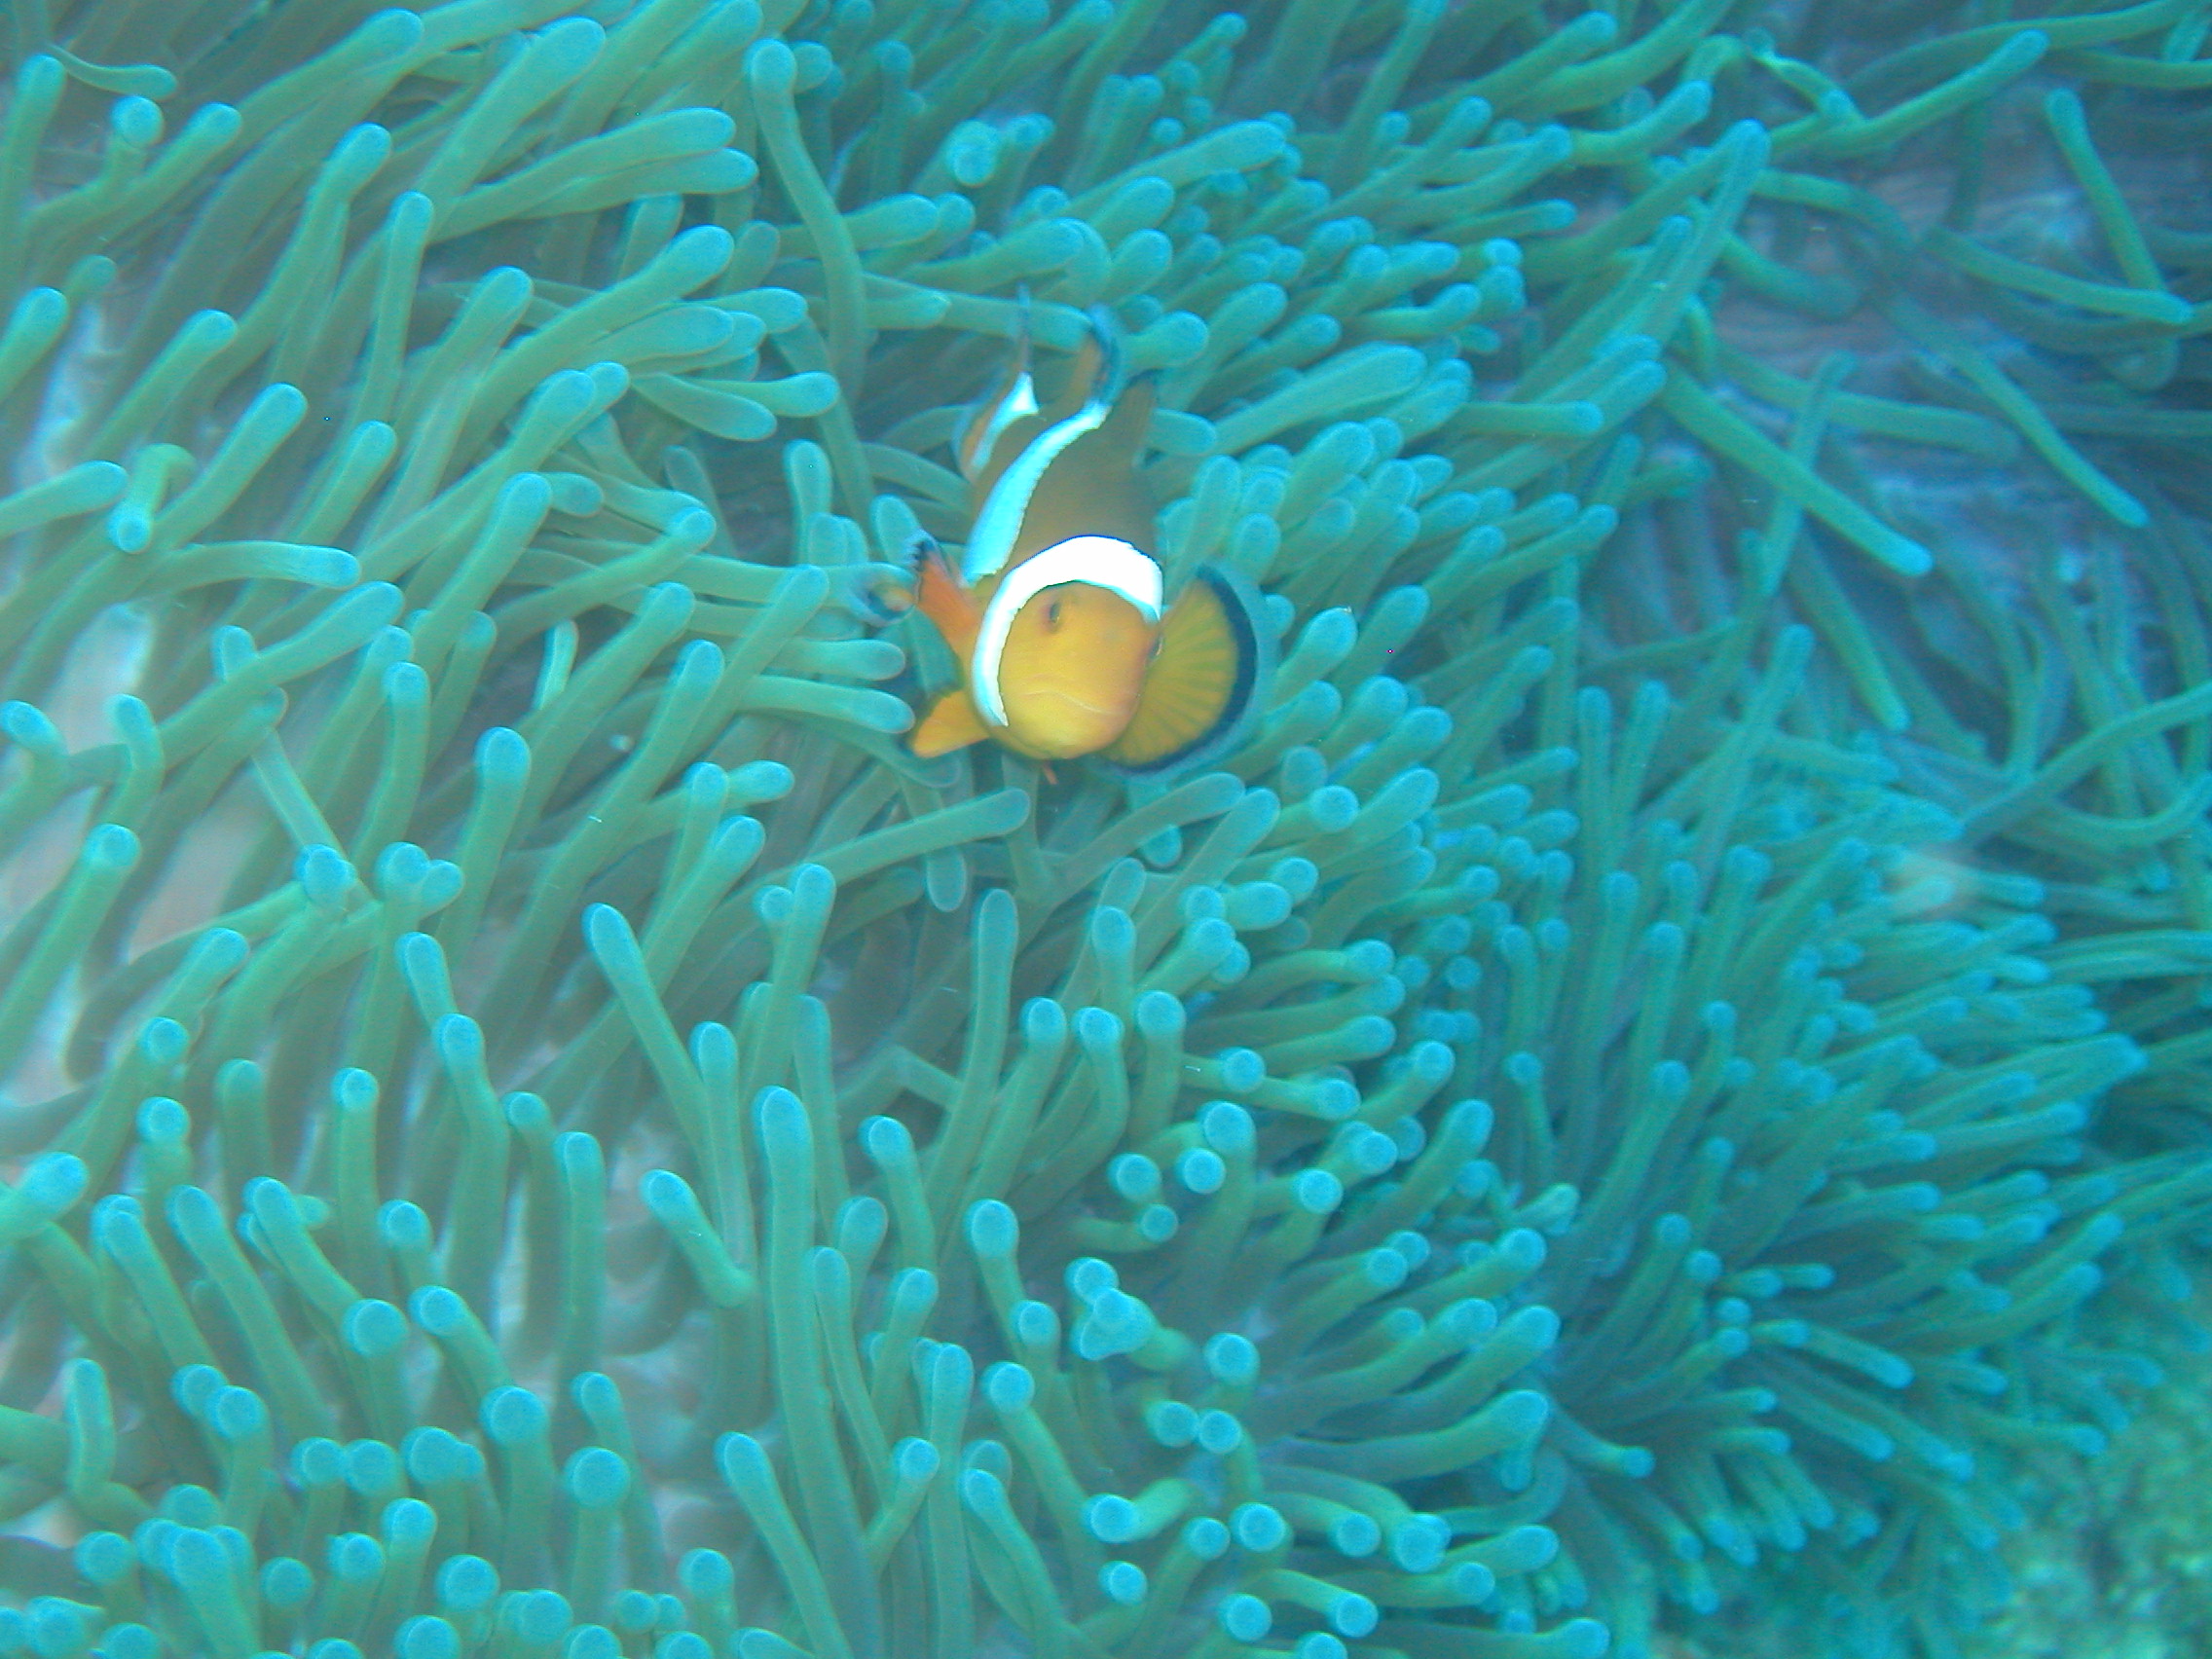 The real Nemo!